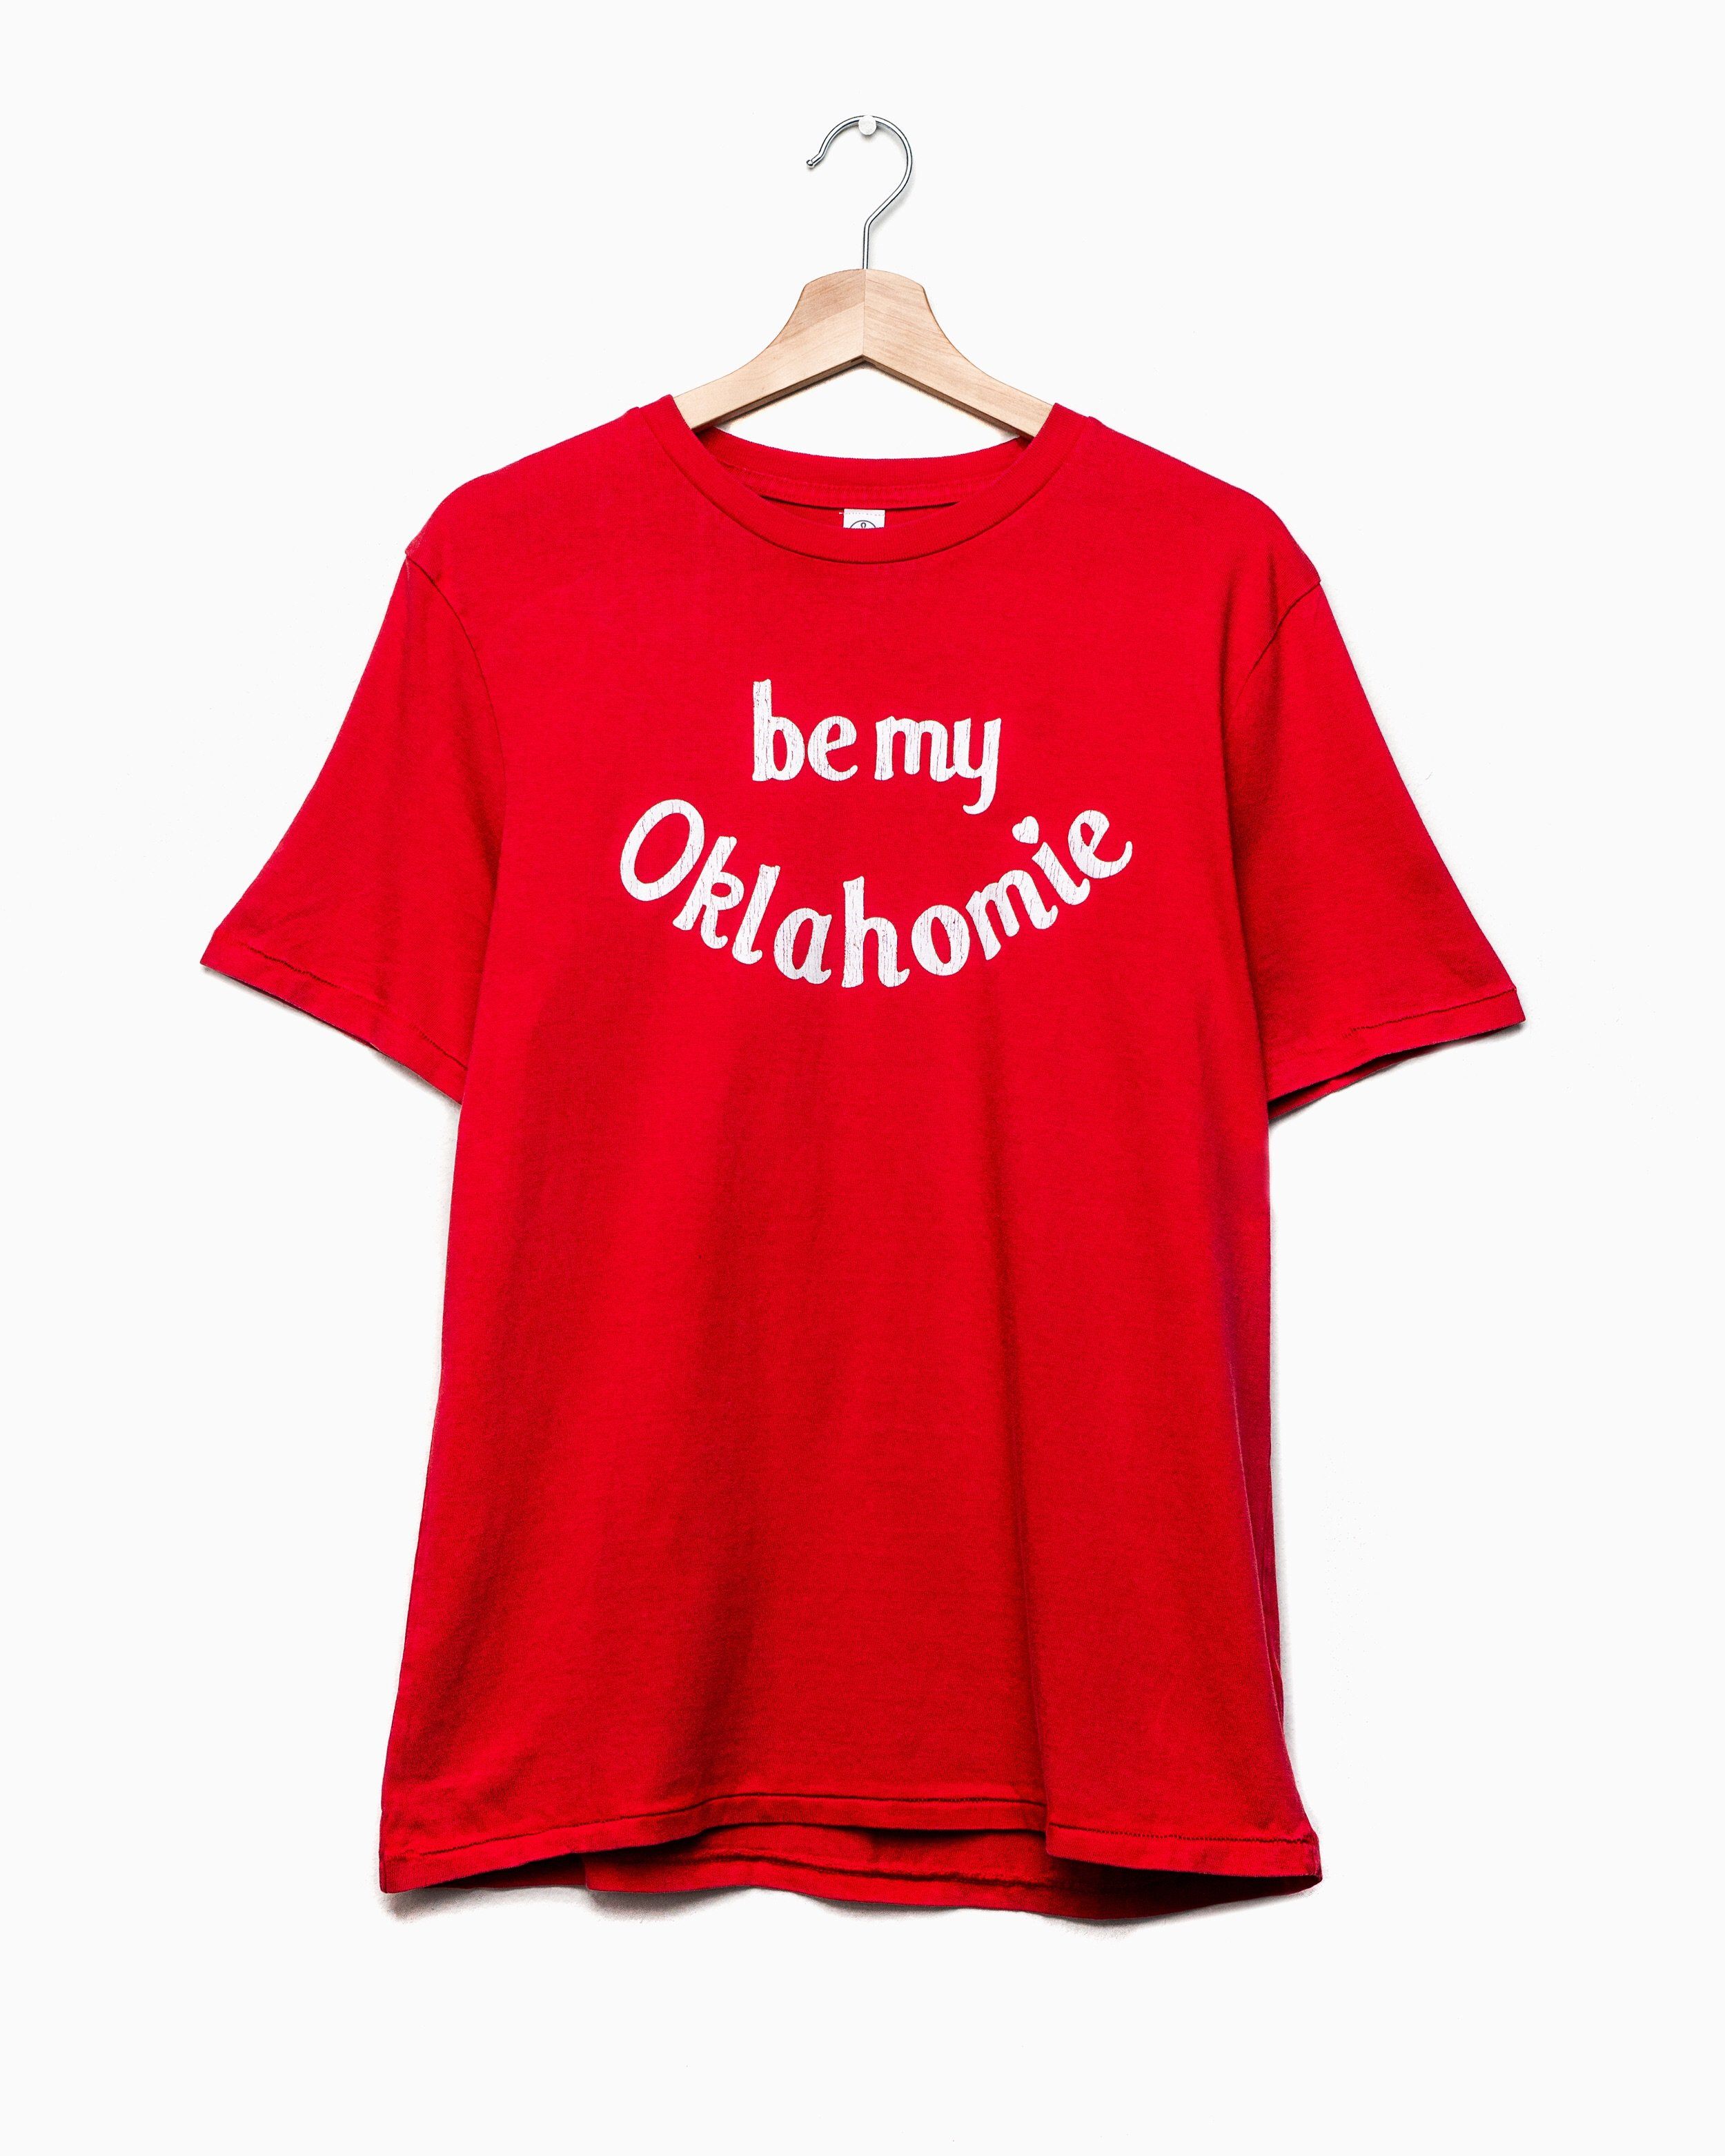 Be My Oklahomie Red Tri-Blend Tee with White Letters (4457113485415)